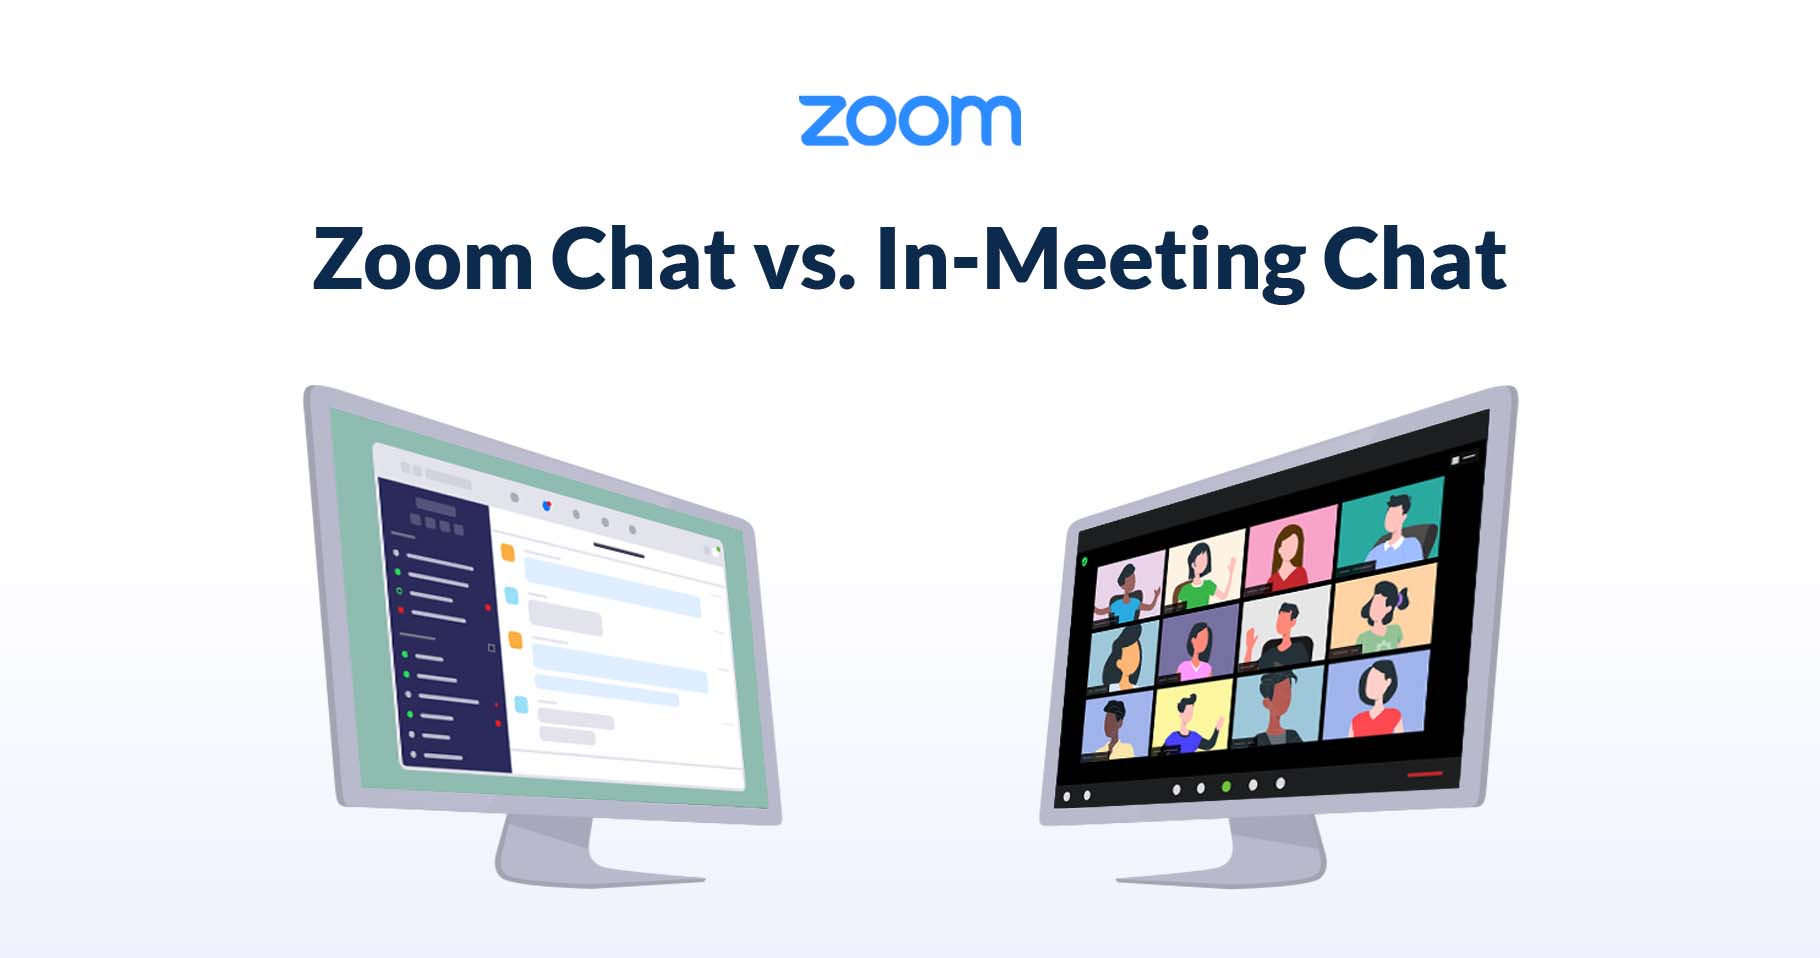 Zoom Chat vs In-Meeting Chat